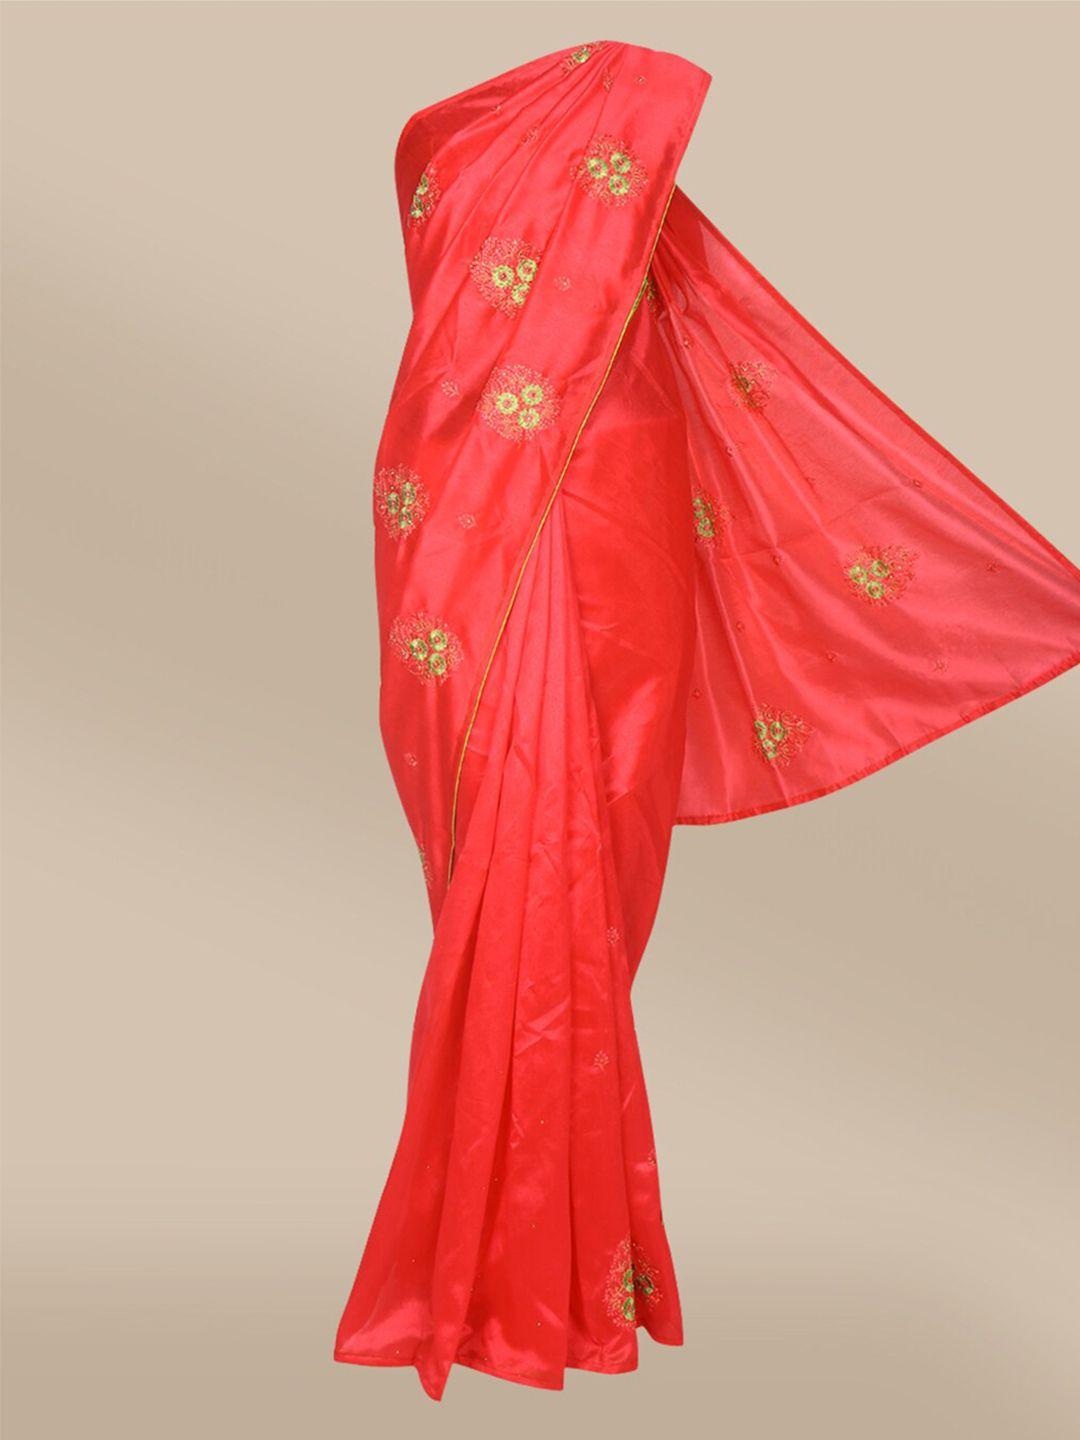 the chennai silks pink & green floral embroidered fusion saree